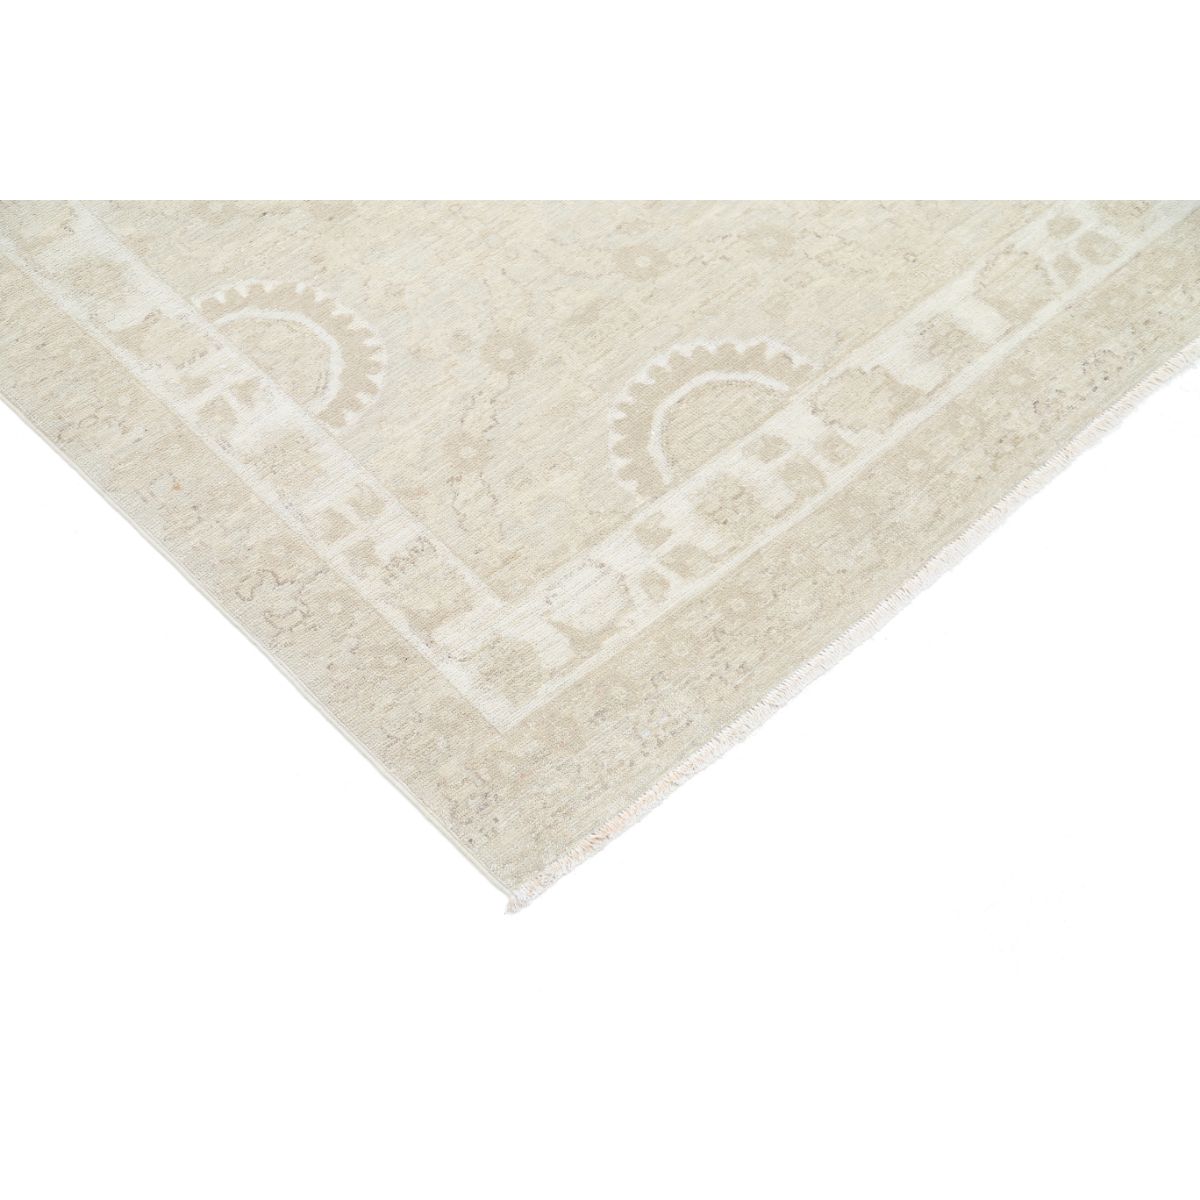 Serenity 6'6" X 9'11" Wool Hand-Knotted Rug